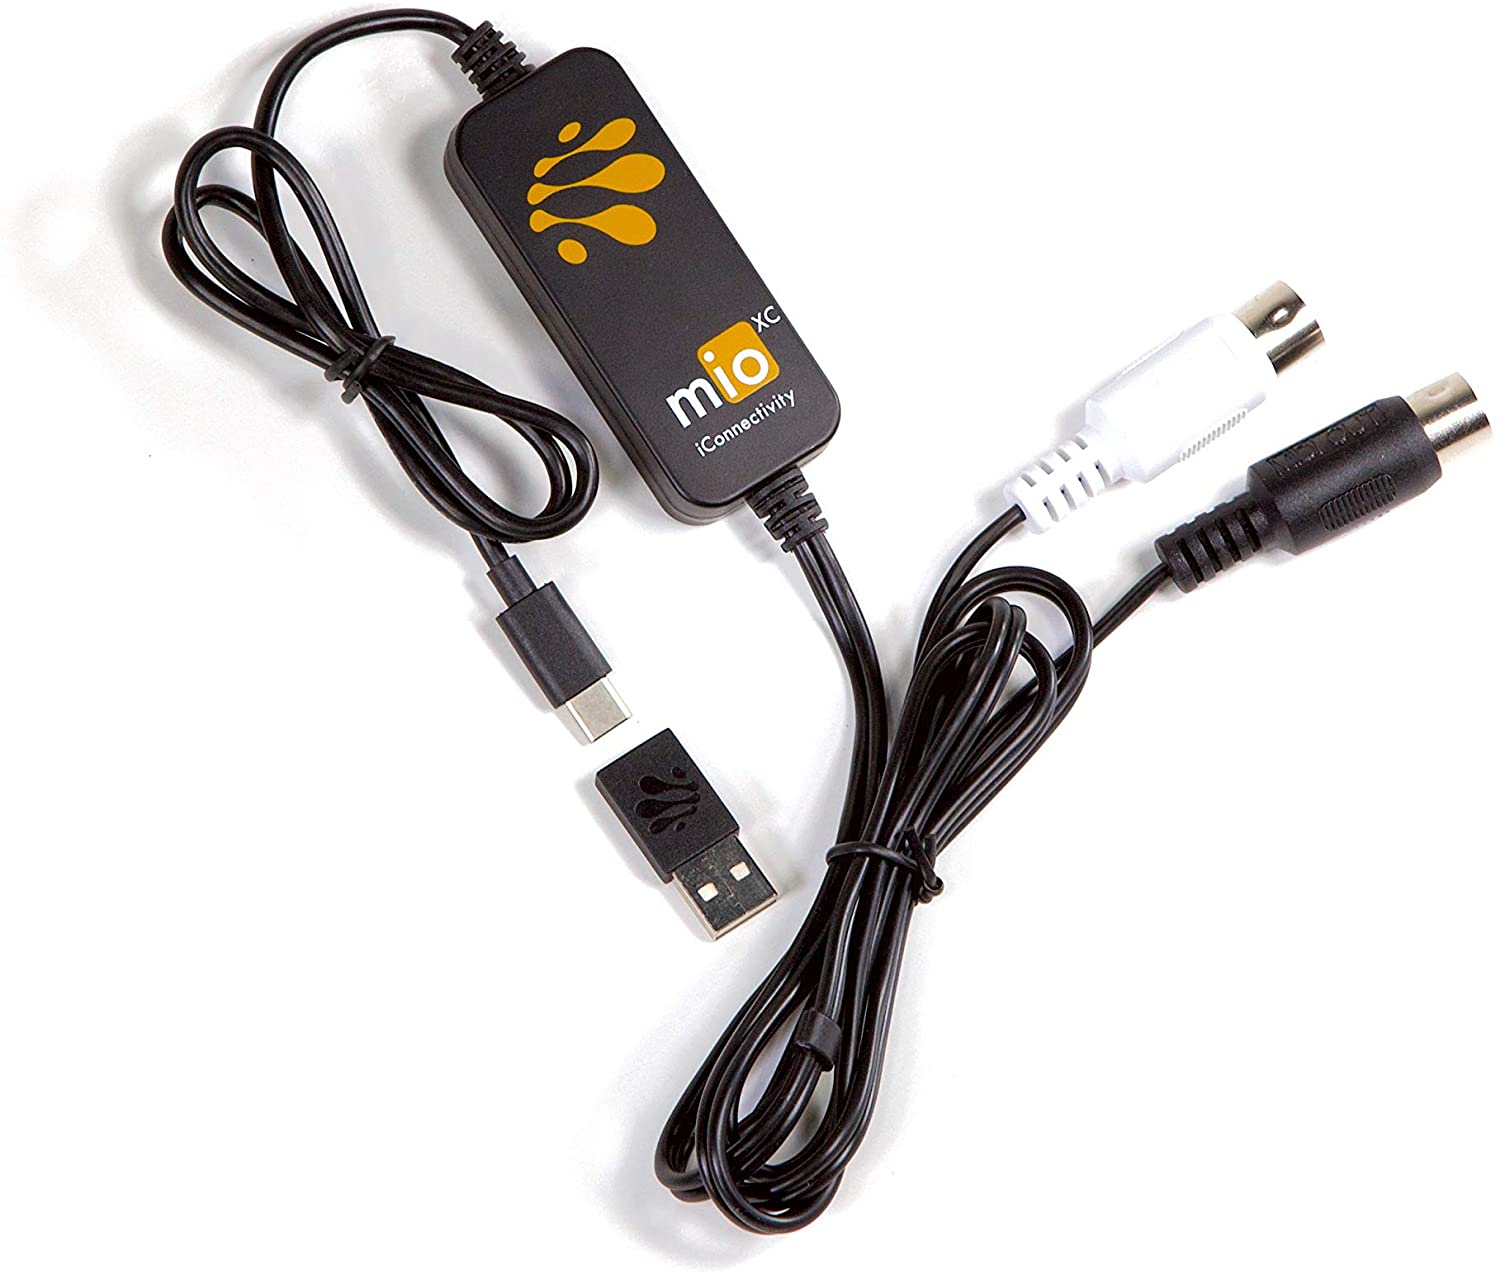 iconnectivity mio 1-in 1-out usb to midi interface for mac and pc